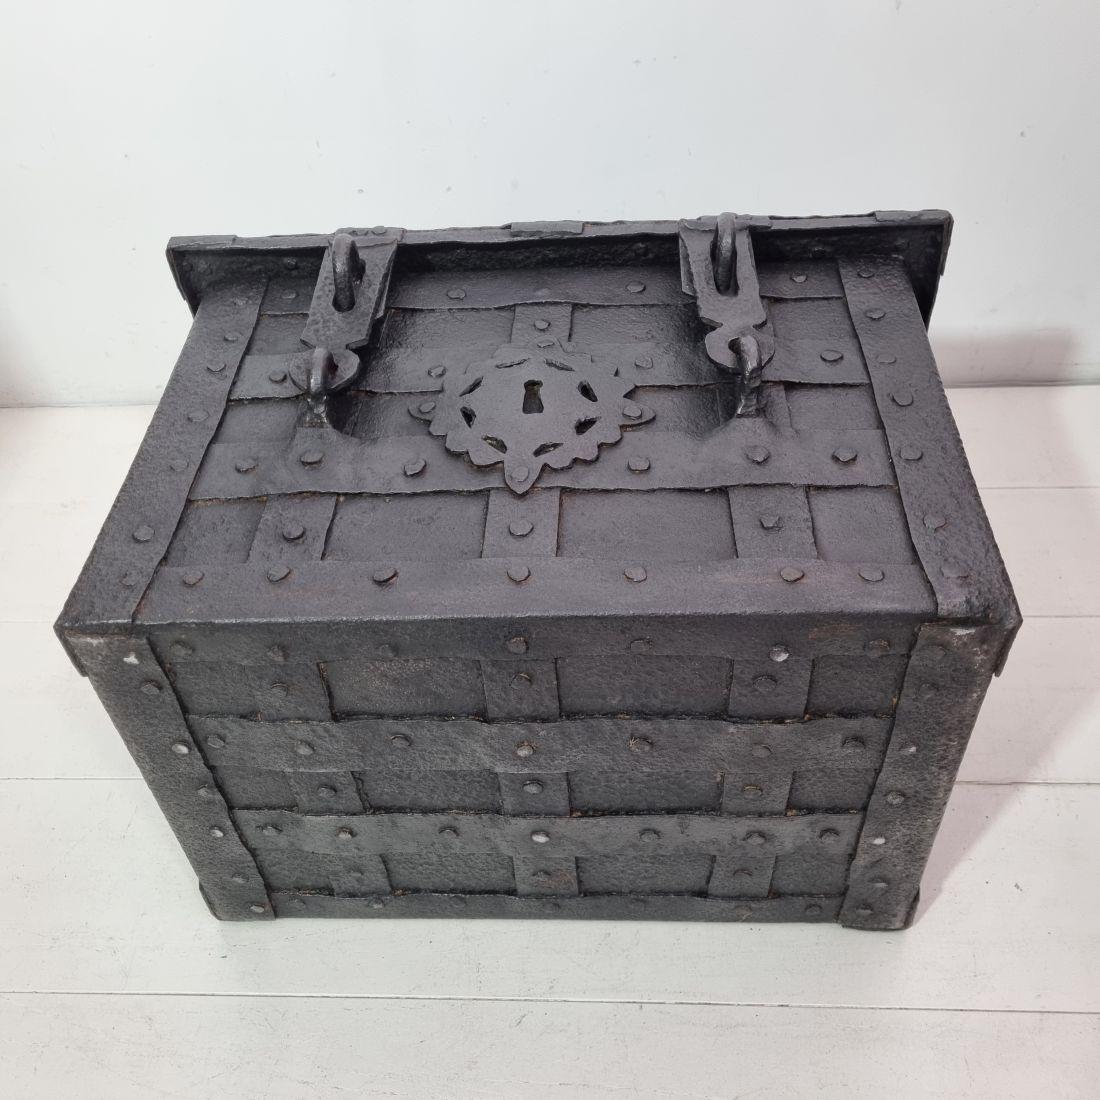 17th Century German Hand Forged Iron Strongbox from Nuremberg or Augsburg 15